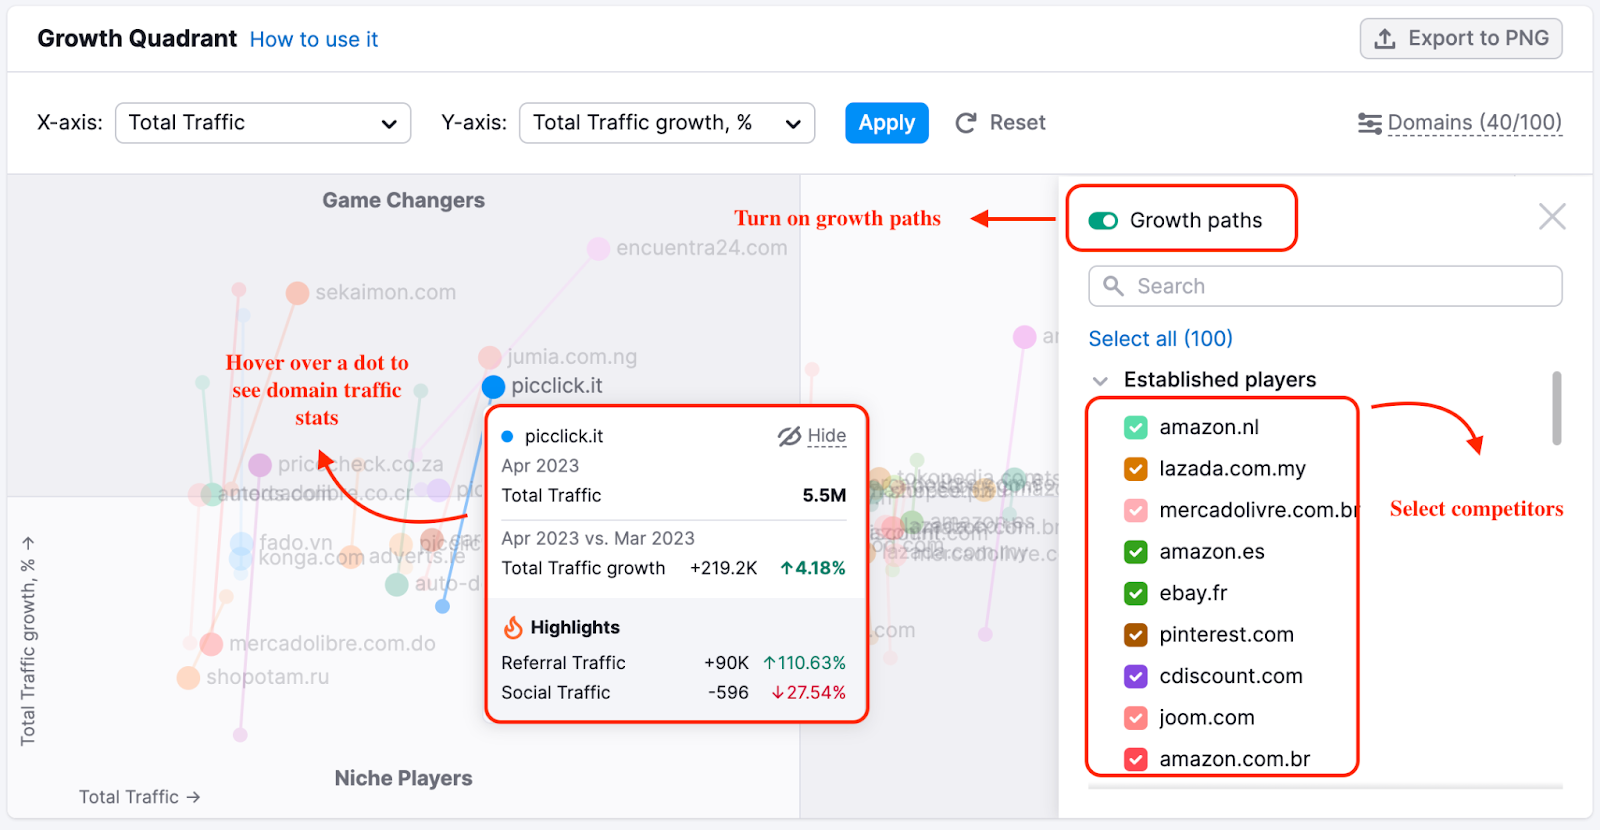 In this screenshot you can see where you can enable growth paths and select competitors in the "Growth Quadrant" widget. 